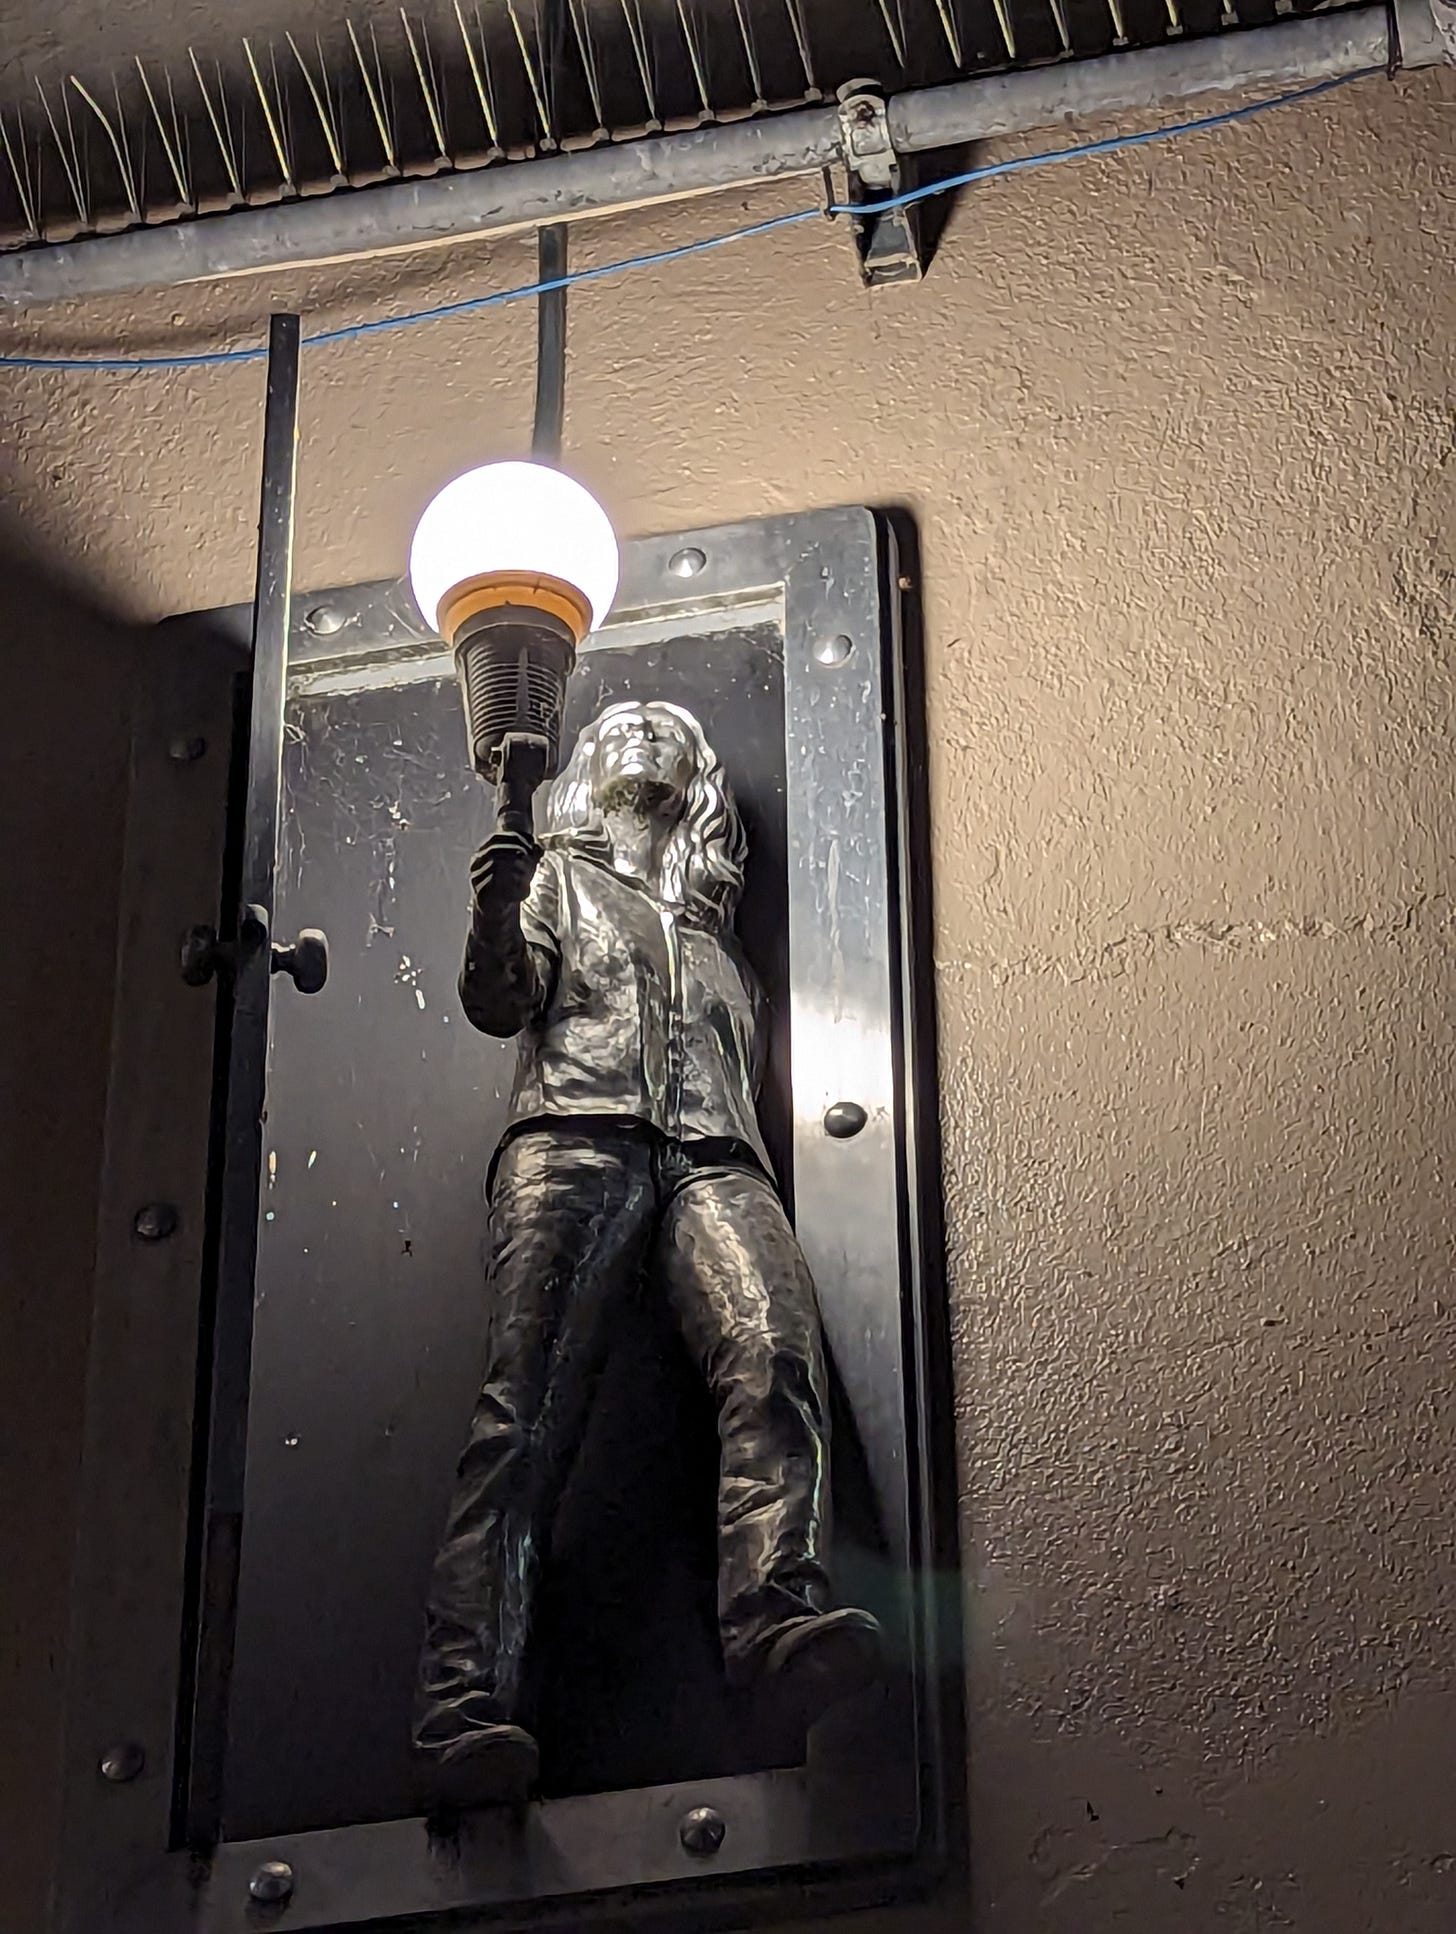 A lamp set high in a wall that is designed to look like a pewter woman with long hair who is holding a lamp in one hand as she pushed open a door and looks out into the world.